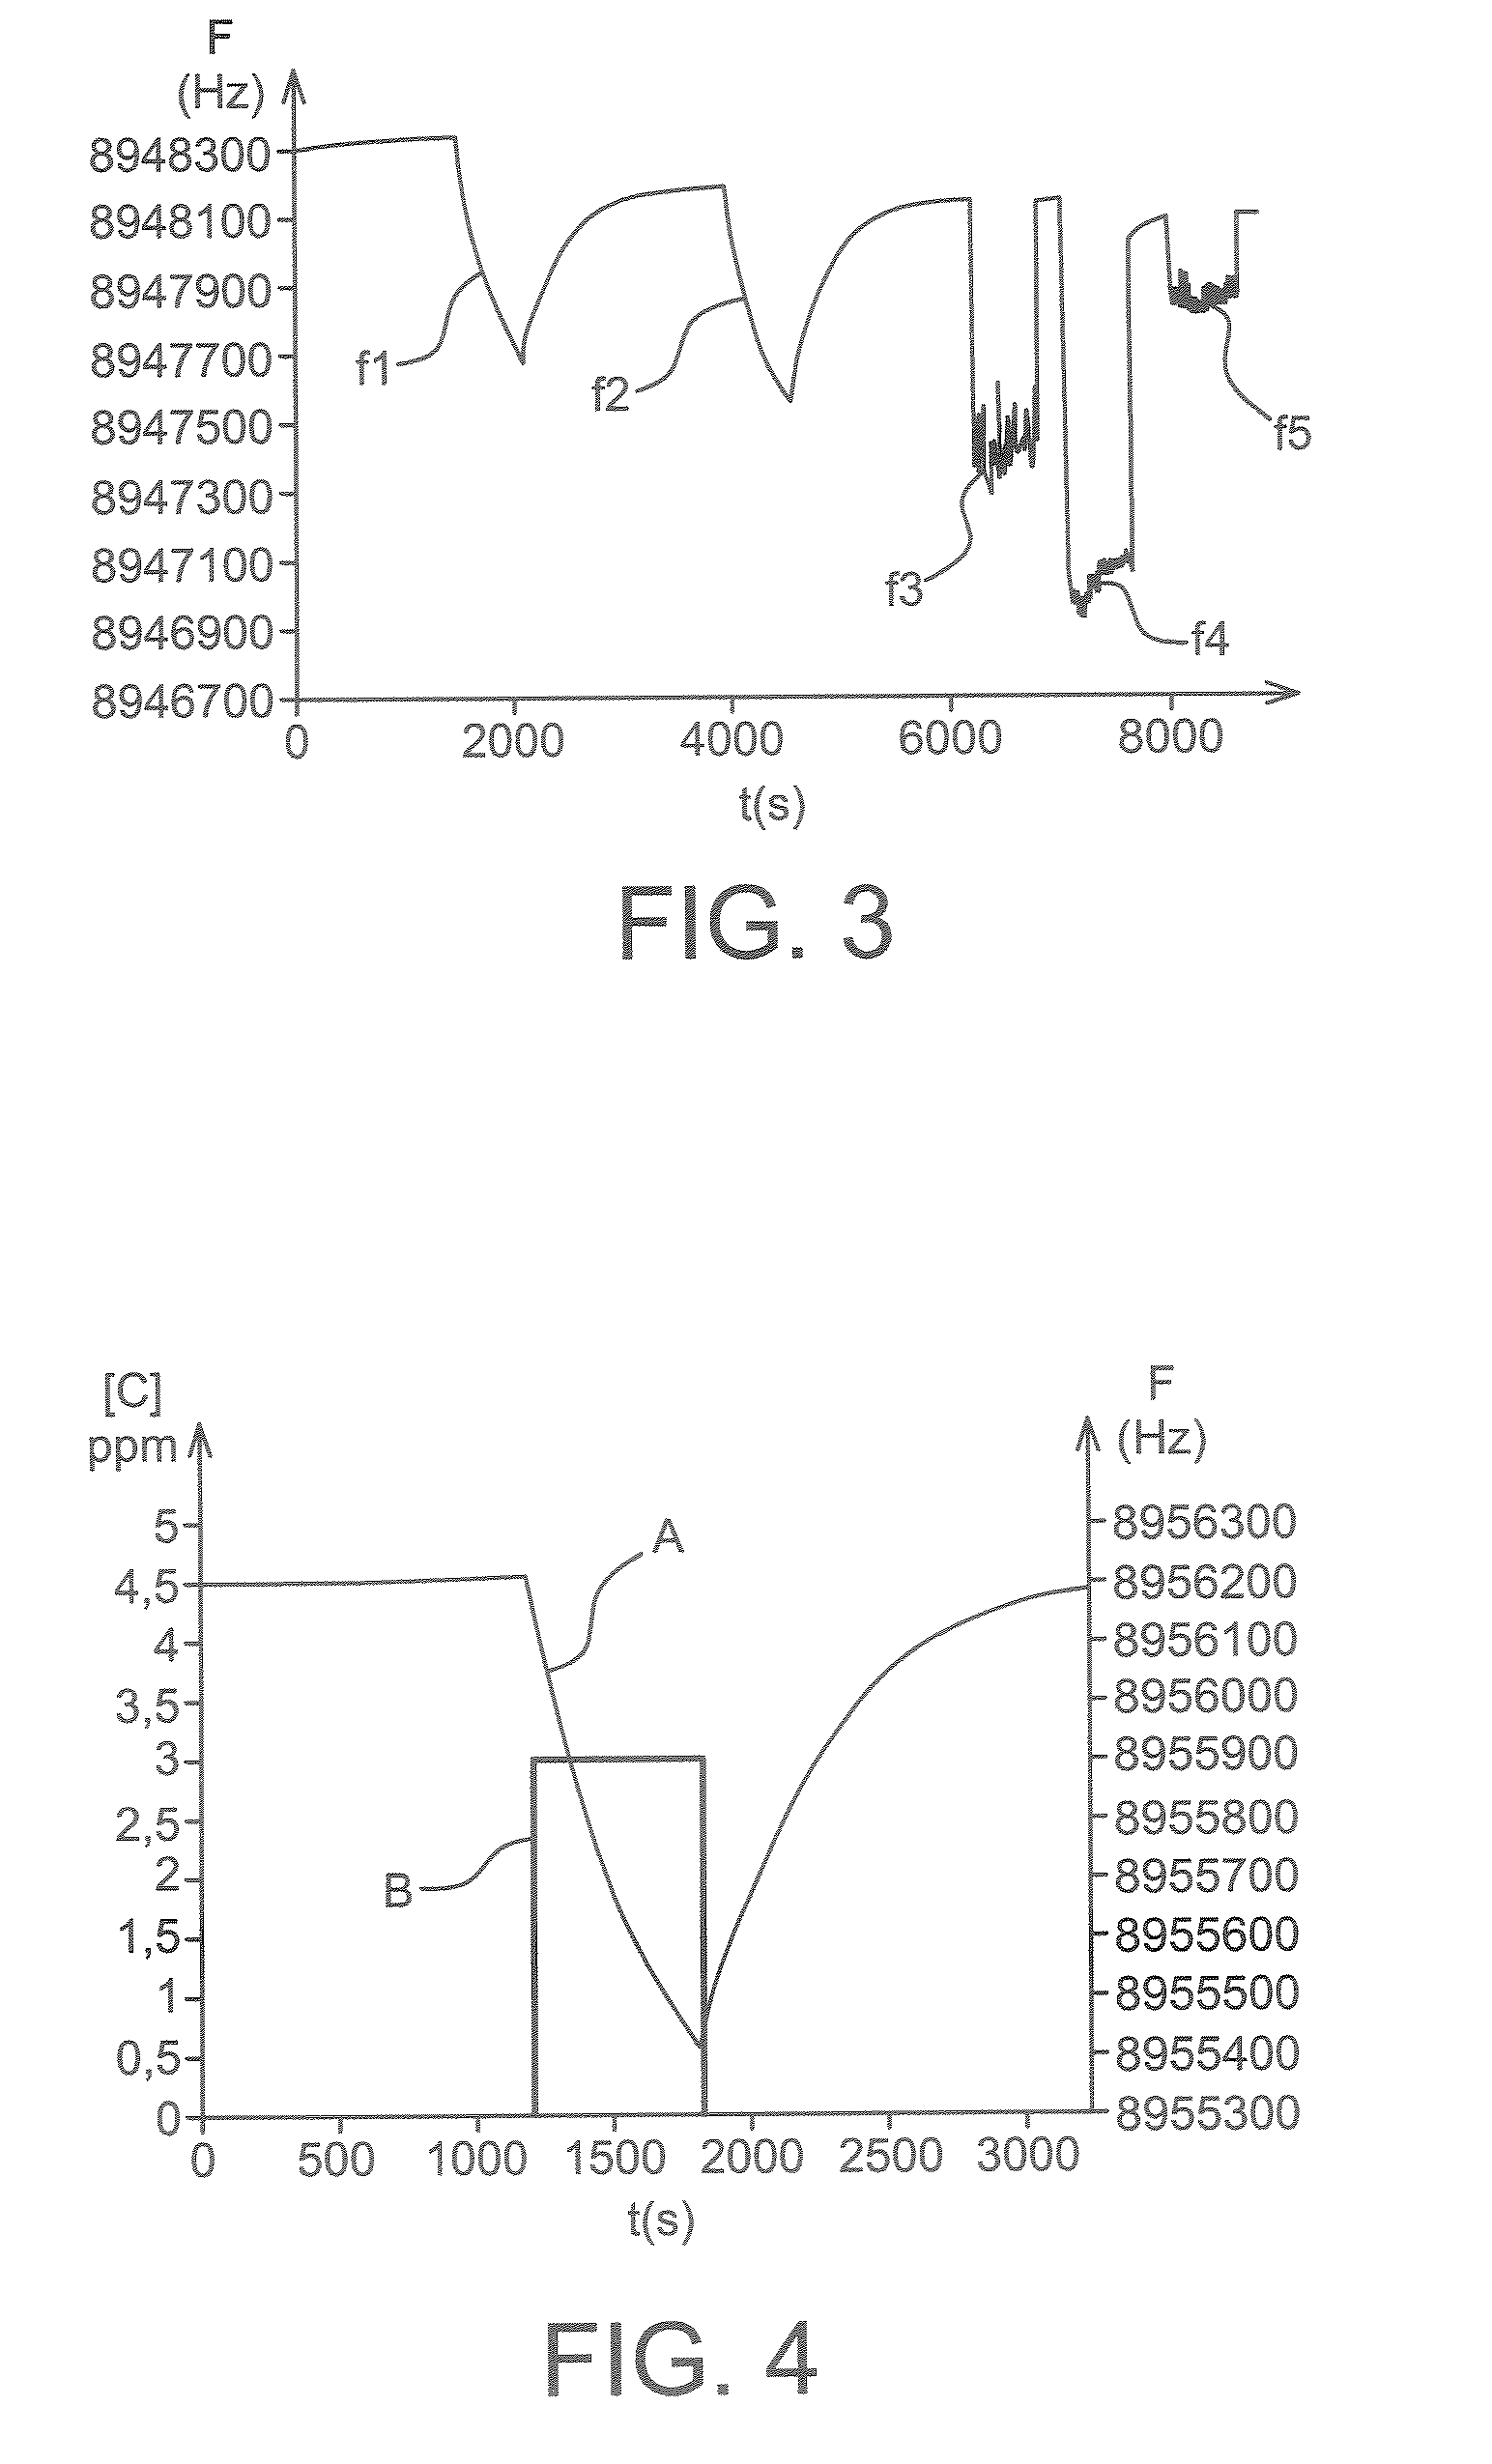 Chemical Sensors Comprising Aniline Polysiloxanes as Sensitive Materials and Use Thereof for Detecting of Assaying Nitro Compounds